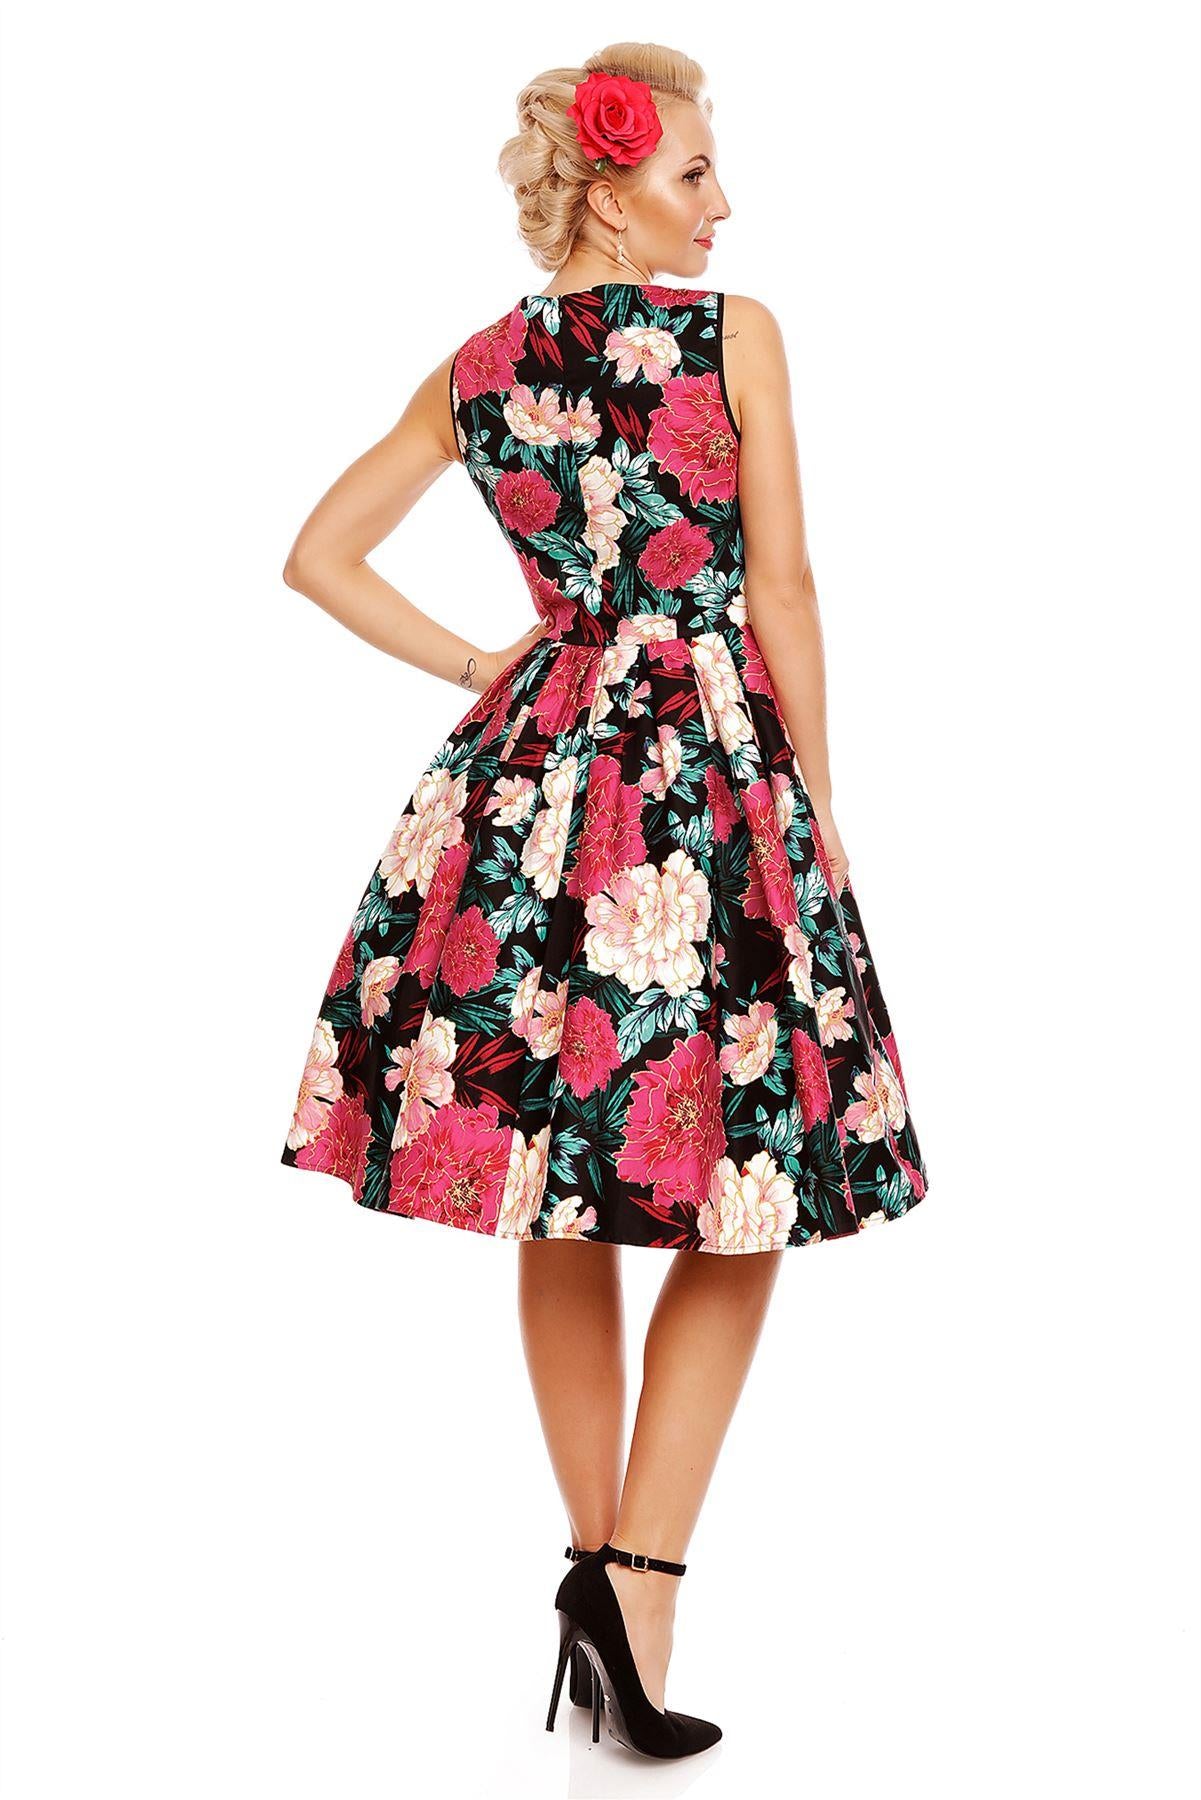 Vintage Style Floral Party Dress in Black-Pink-Gold